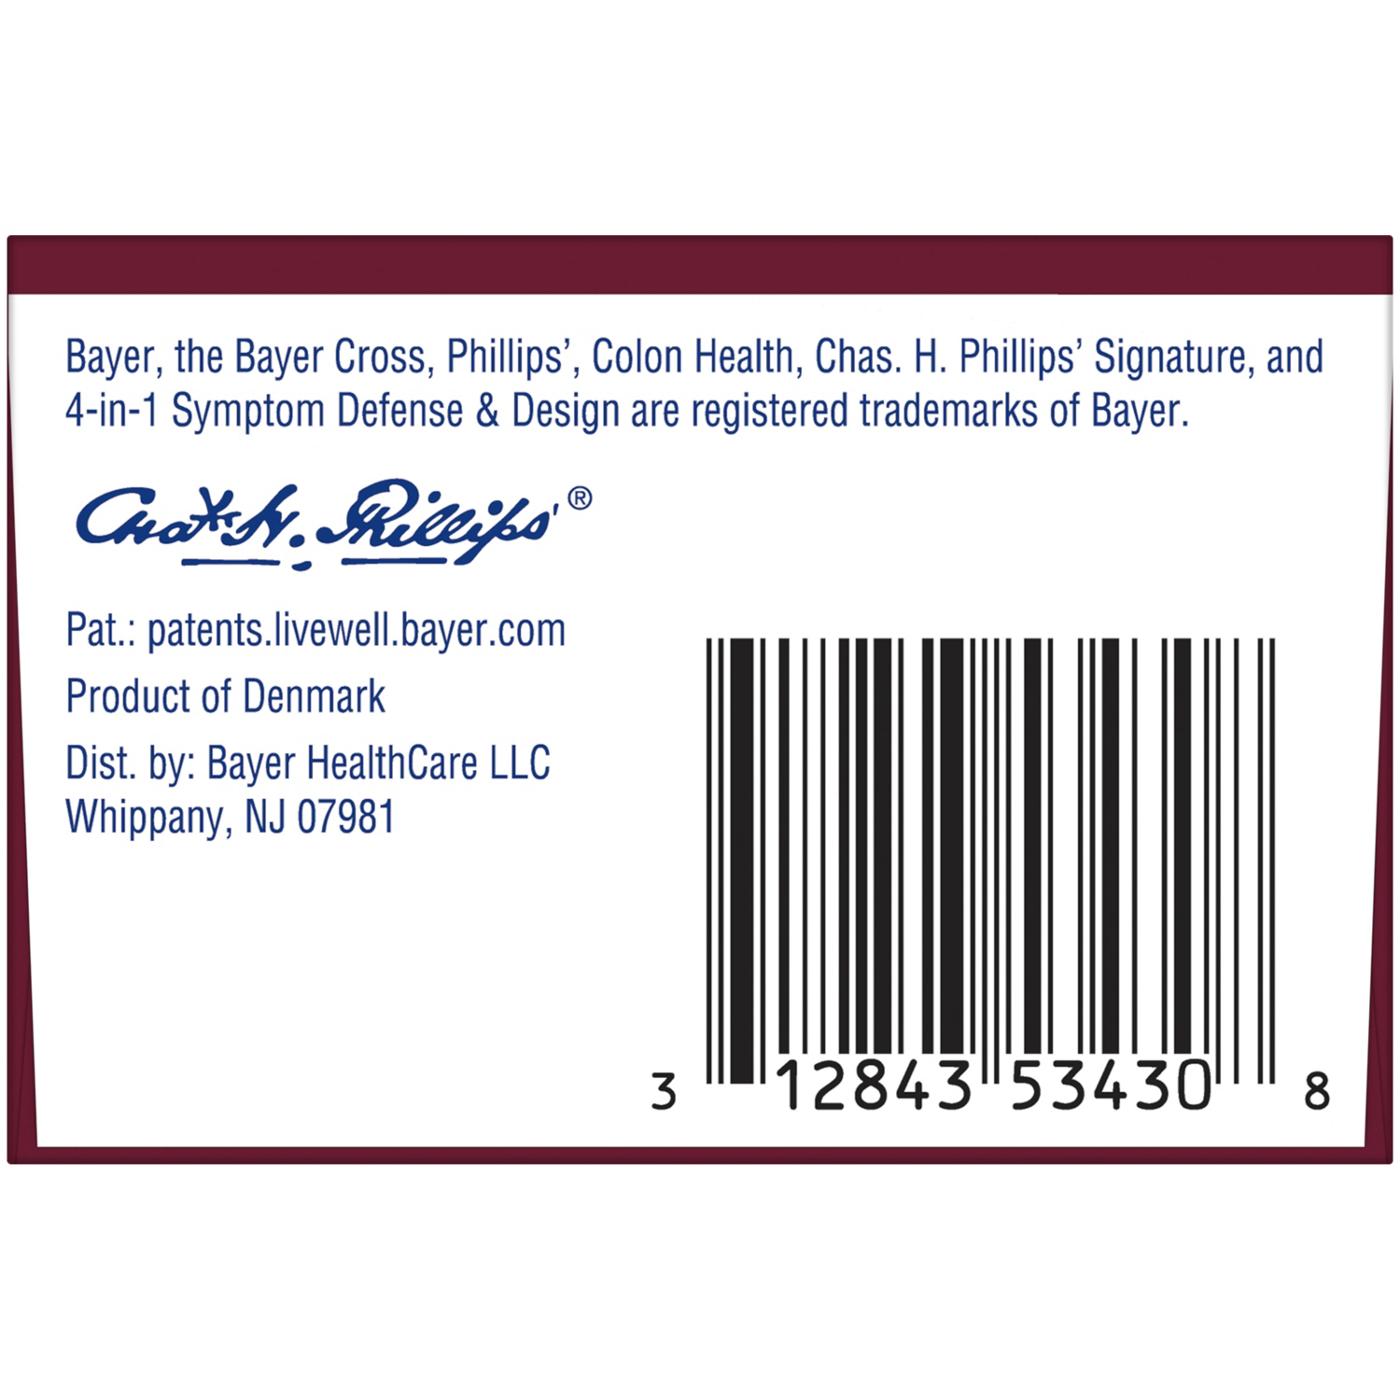 Phillips Daily Care Colon Health Probiotic Capsules; image 8 of 8